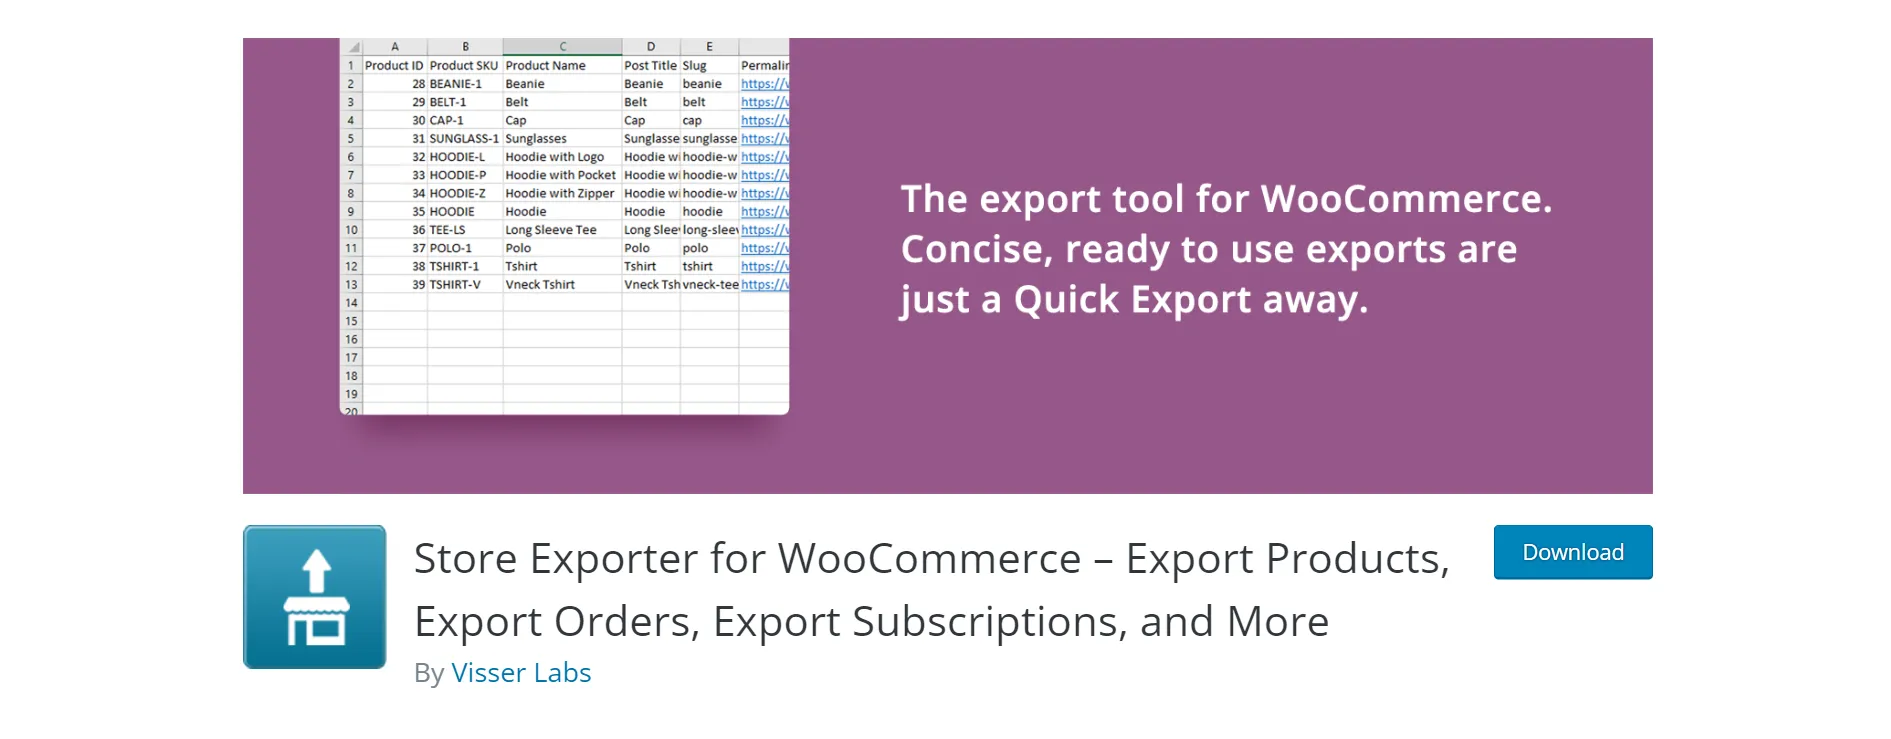 Store Exporter for WooCommerce